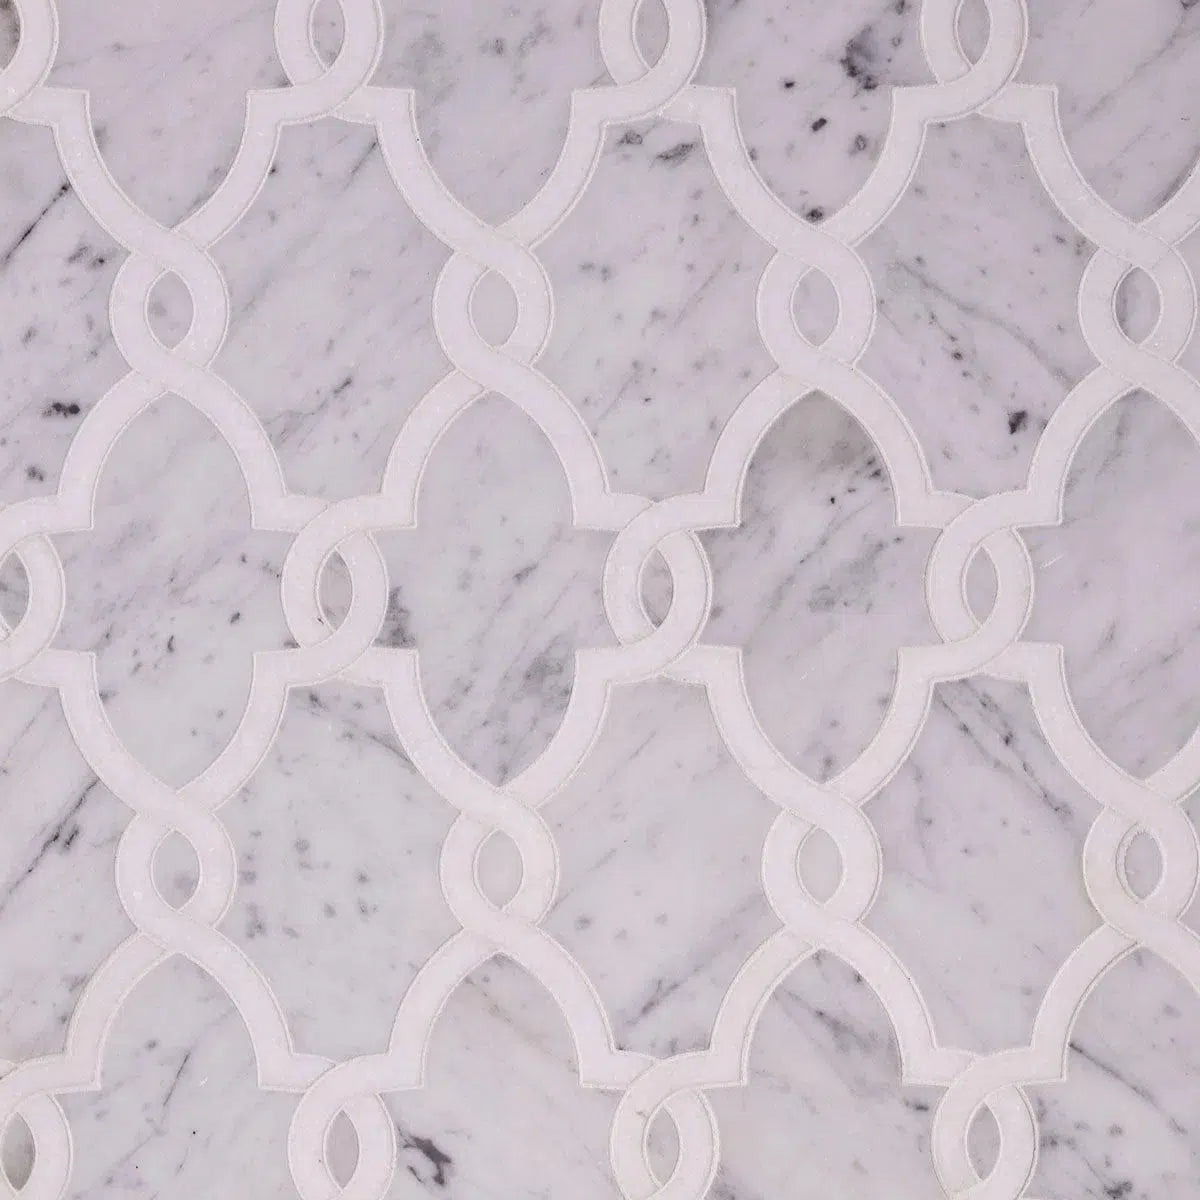 Gray and White marble patterned tile for a traditional kitchen backsplash